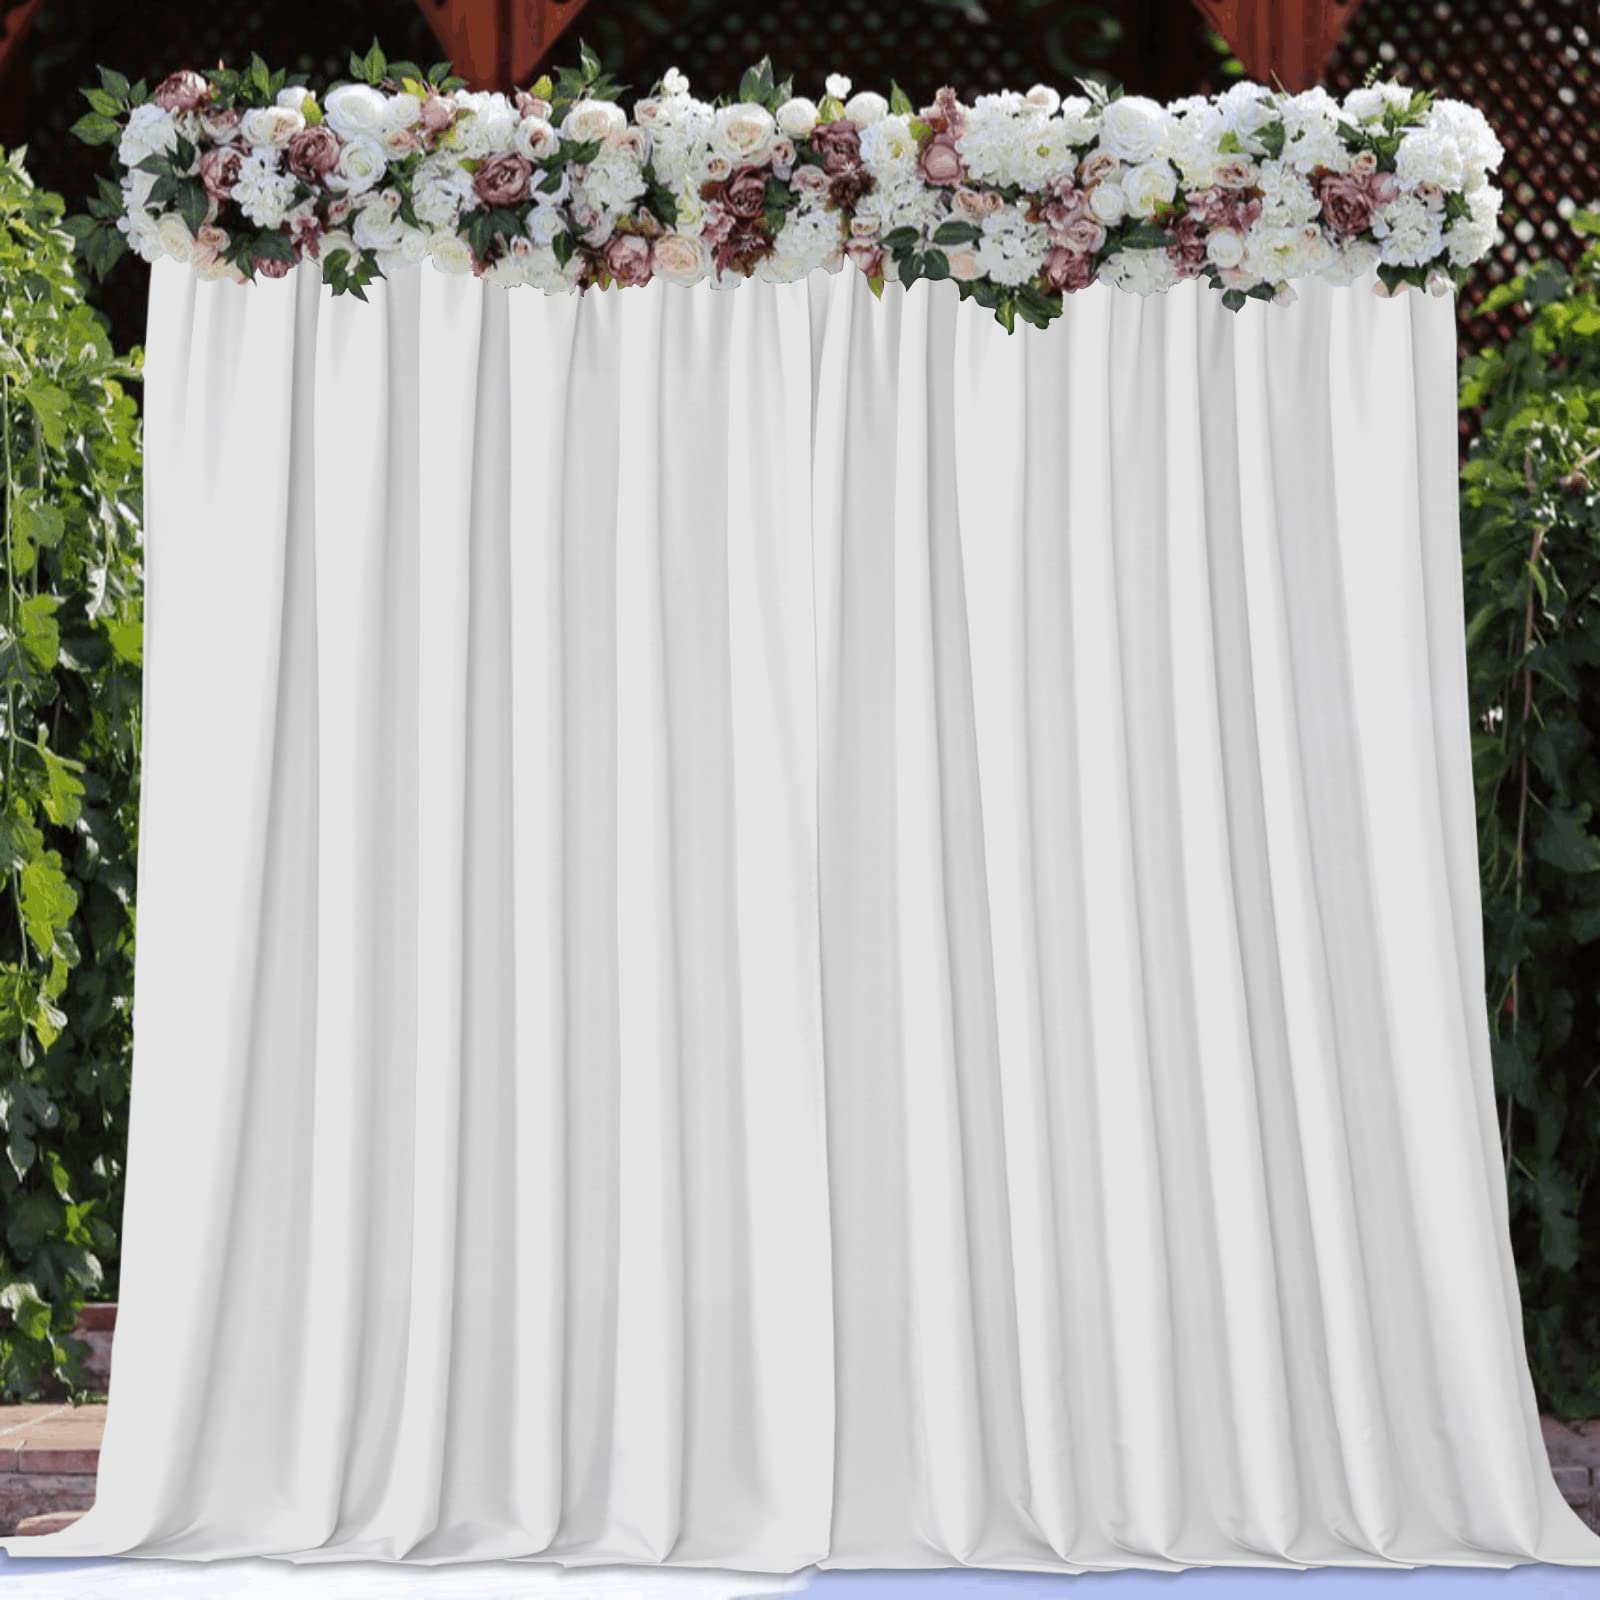 Joydeco White Backdrop Curtains for Parties, Photography Backdrop Drapes for Wedding Decorations Birthday, Wrinkle Free Polyester 5ft x 8ft Fabric Drape 2 Panels with Rod Pockets